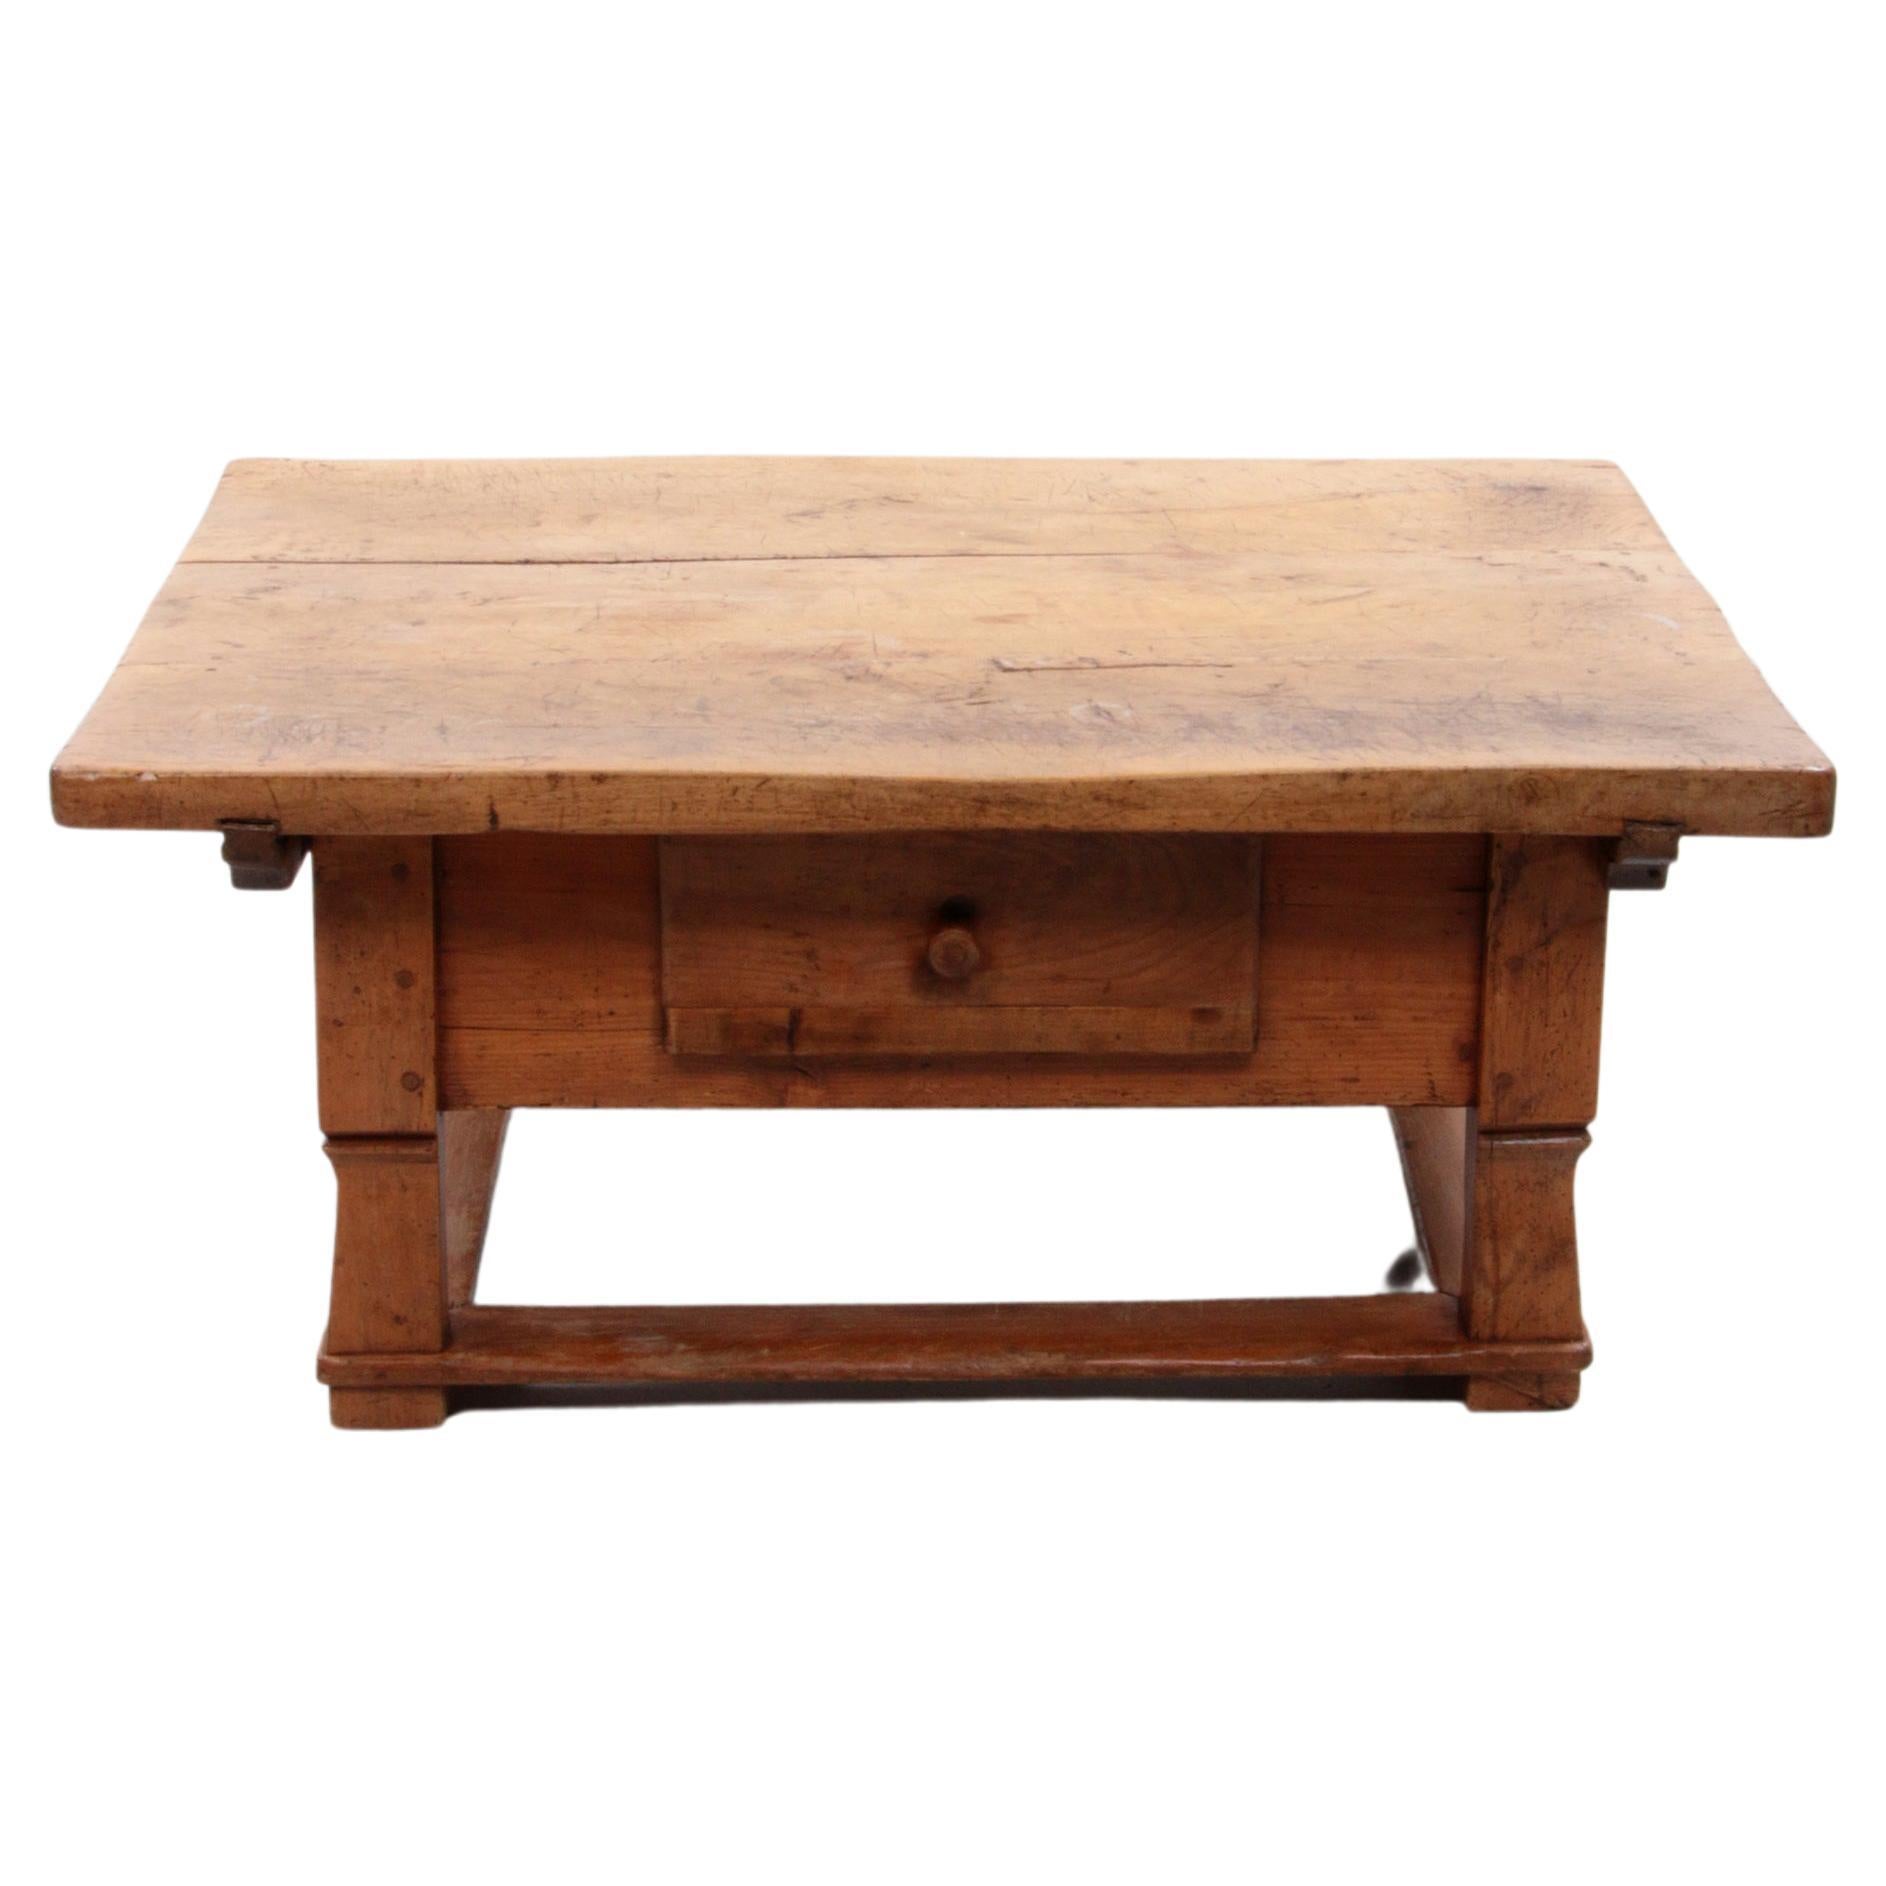 Austrian Coffee Table18- 19th Century Walnut Payment Table with Drawer, Austria